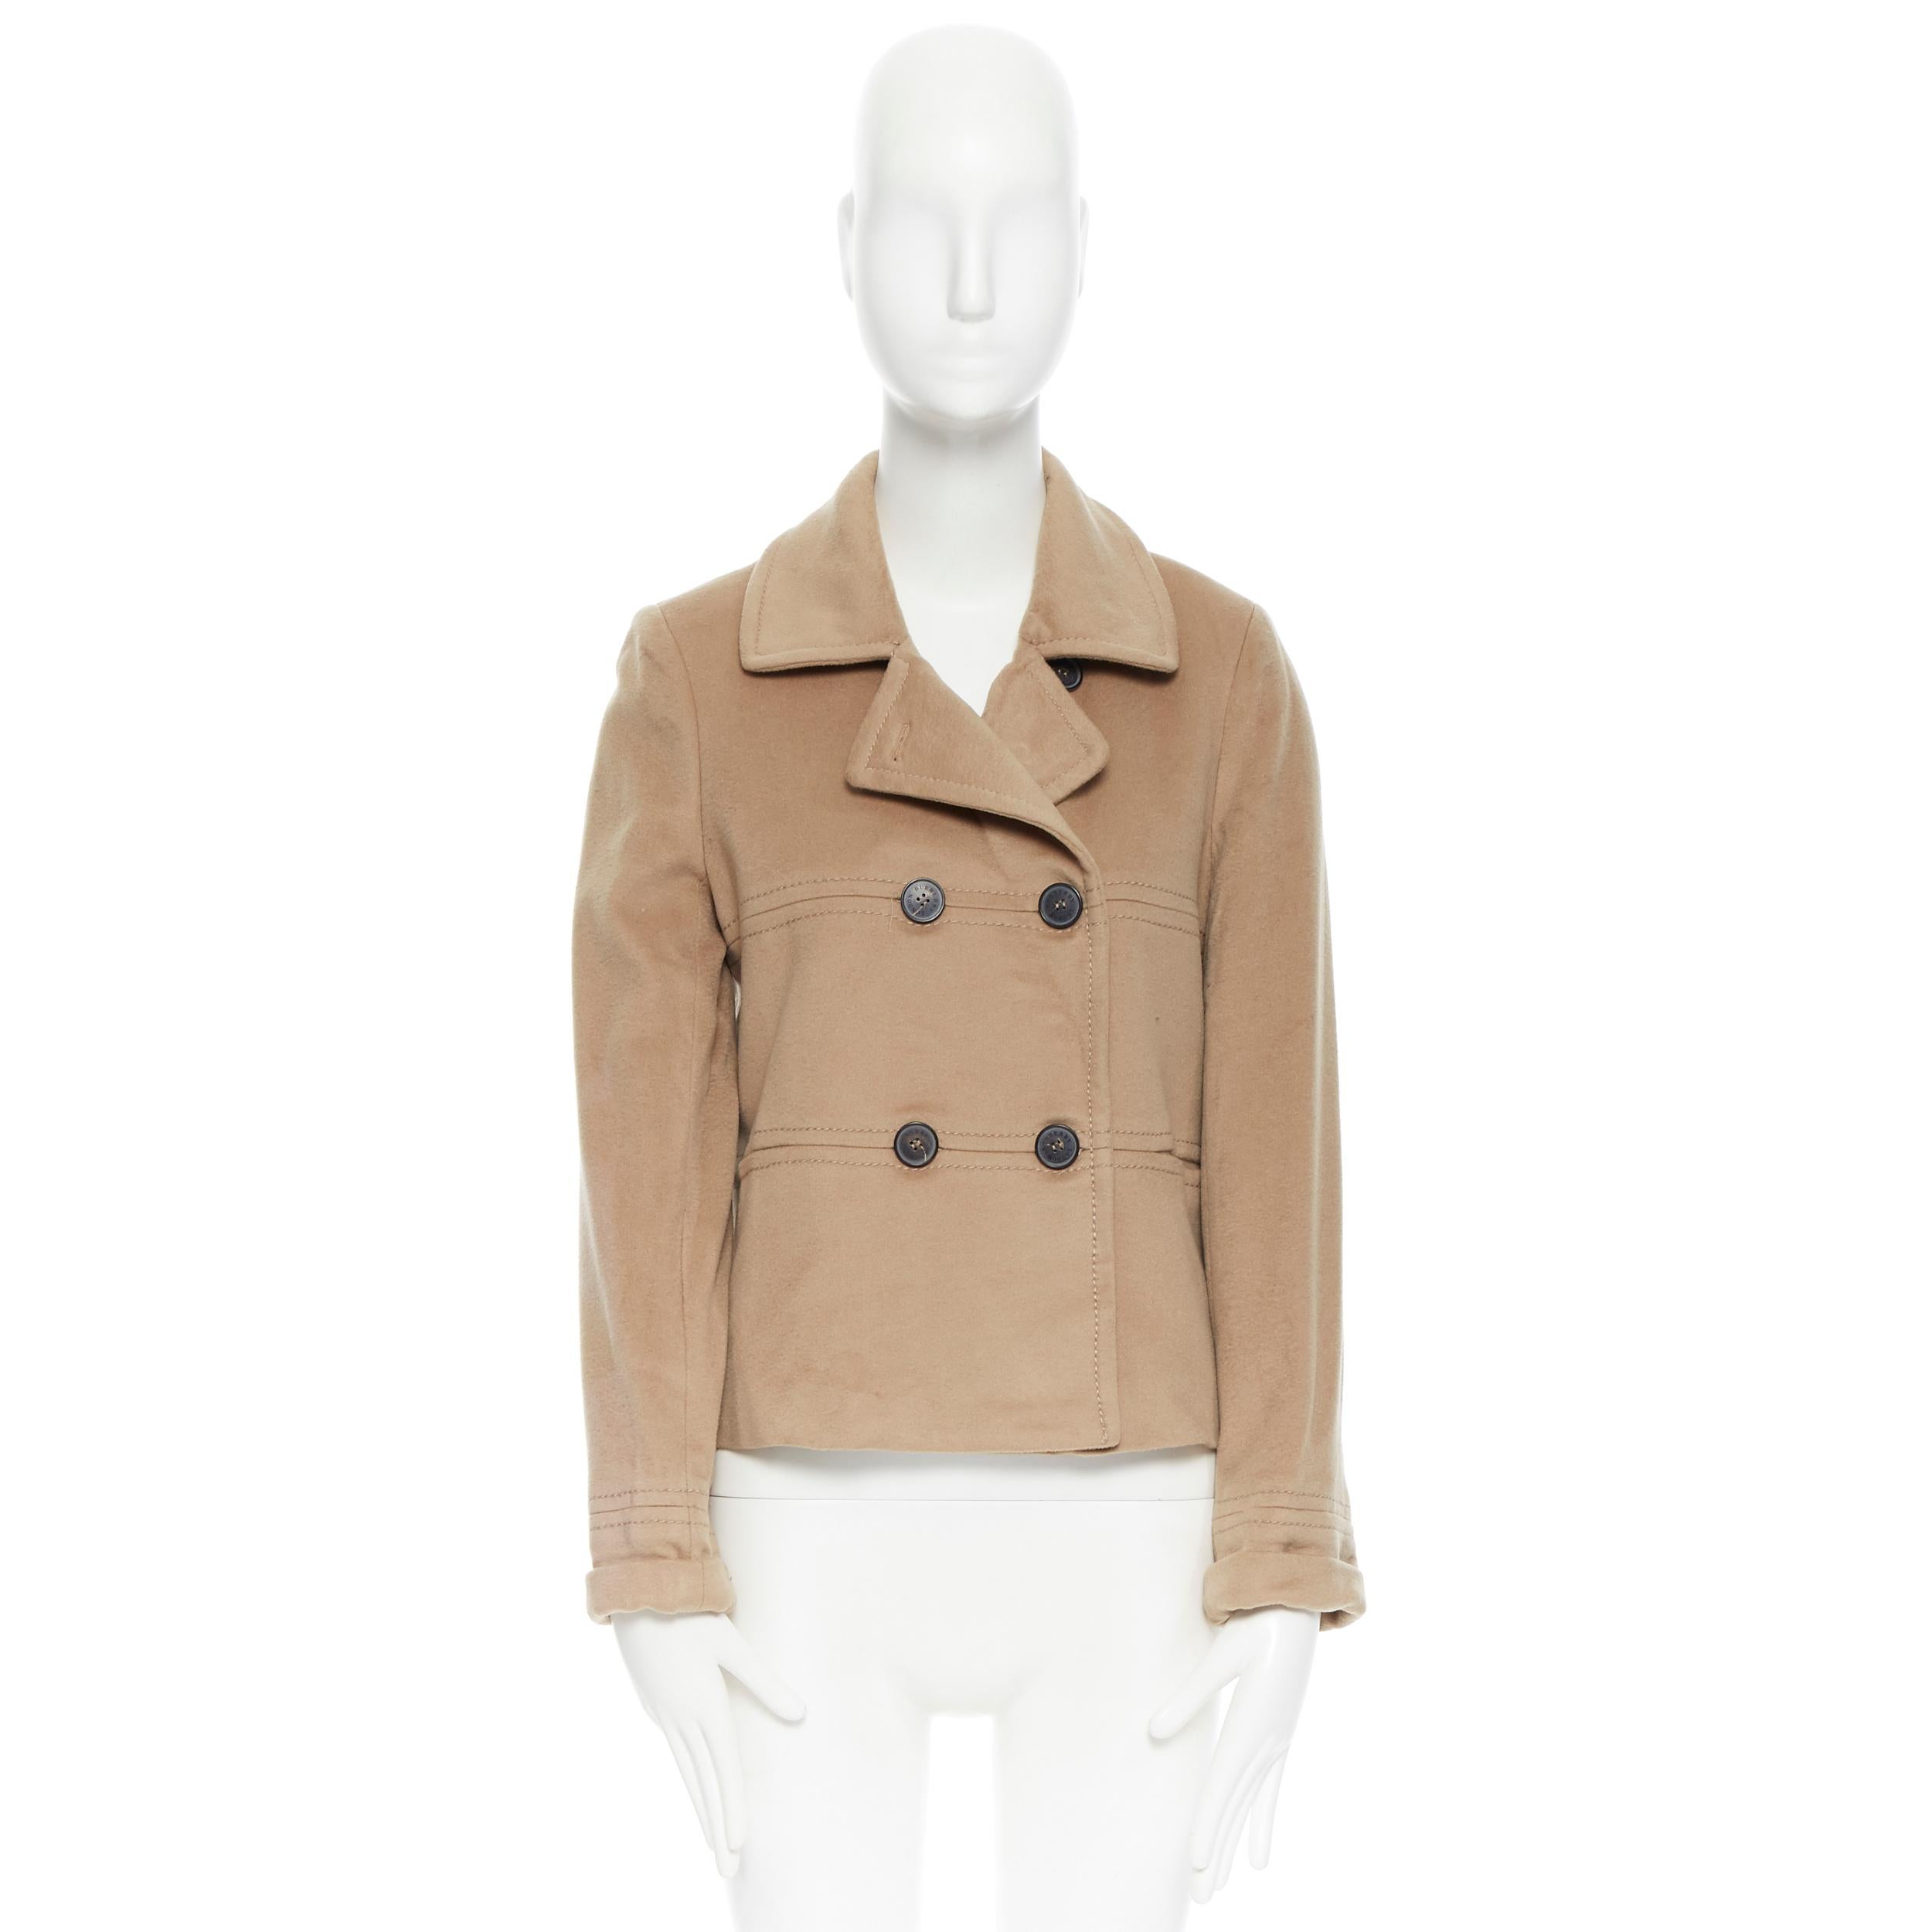 BURBERRY LONDON camel beige wool cashmere blend double breasted jacket US10
Brand: Burberry
Model Name / Style: Wool coat
Material: Wool cashmere blend
Color: Beige
Pattern: Solid
Closure: Button
Lining material: Viscose
Extra Detail: Long sleeve.